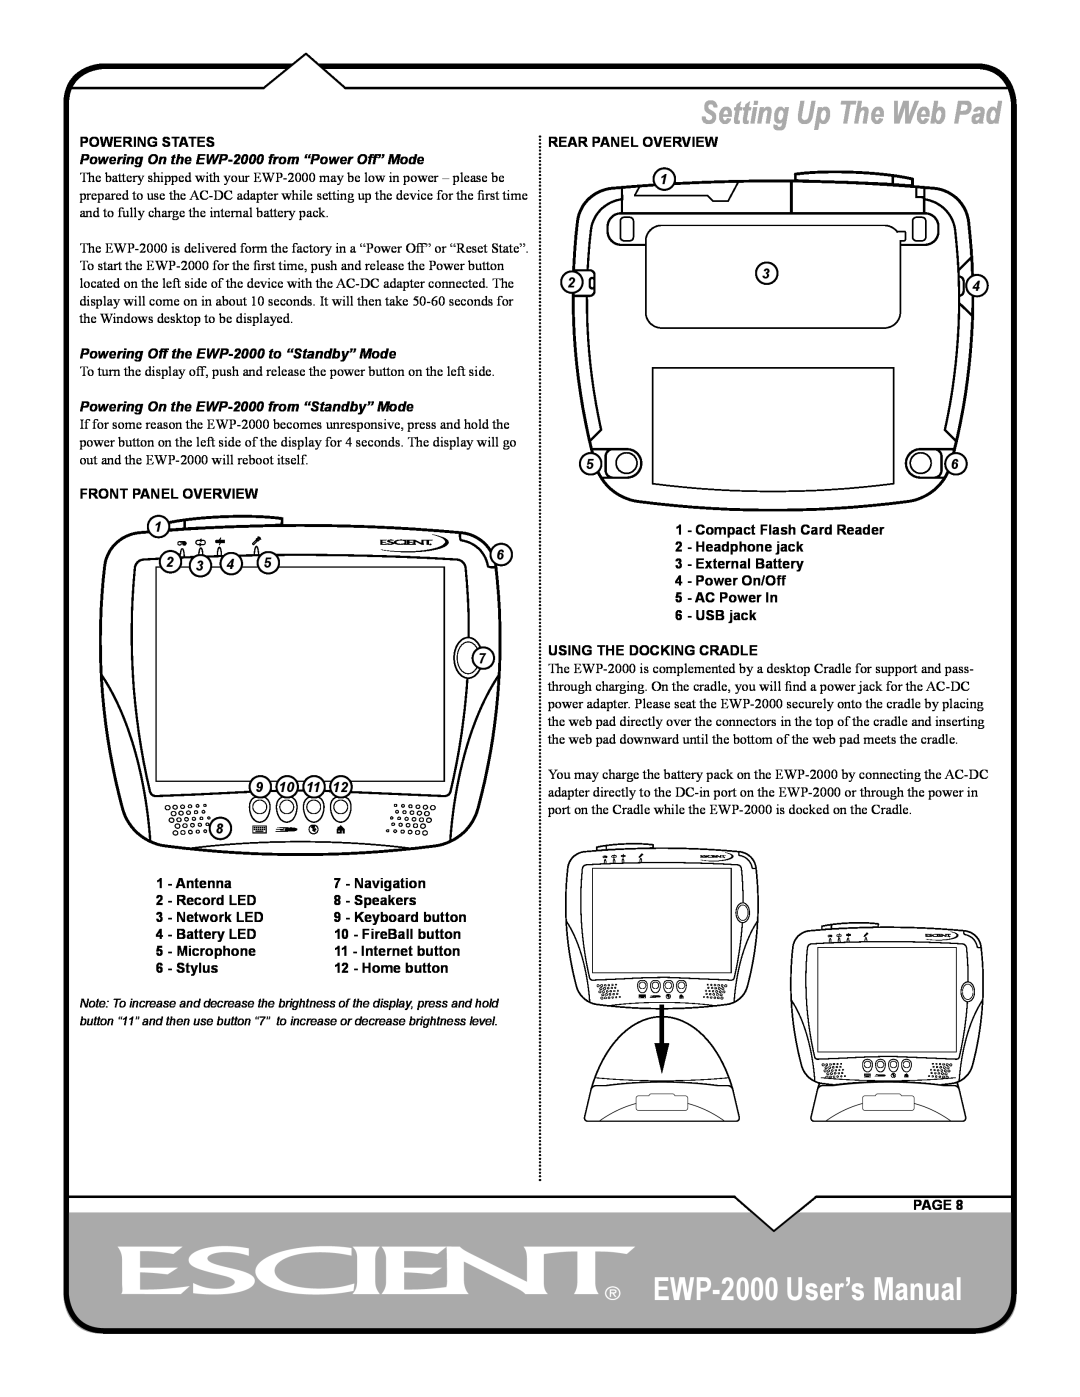 Escient Setting Up The Web Pad, EWP-2000 User’s Manual, Powering States, Front Panel Overview, Rear Panel Overview 